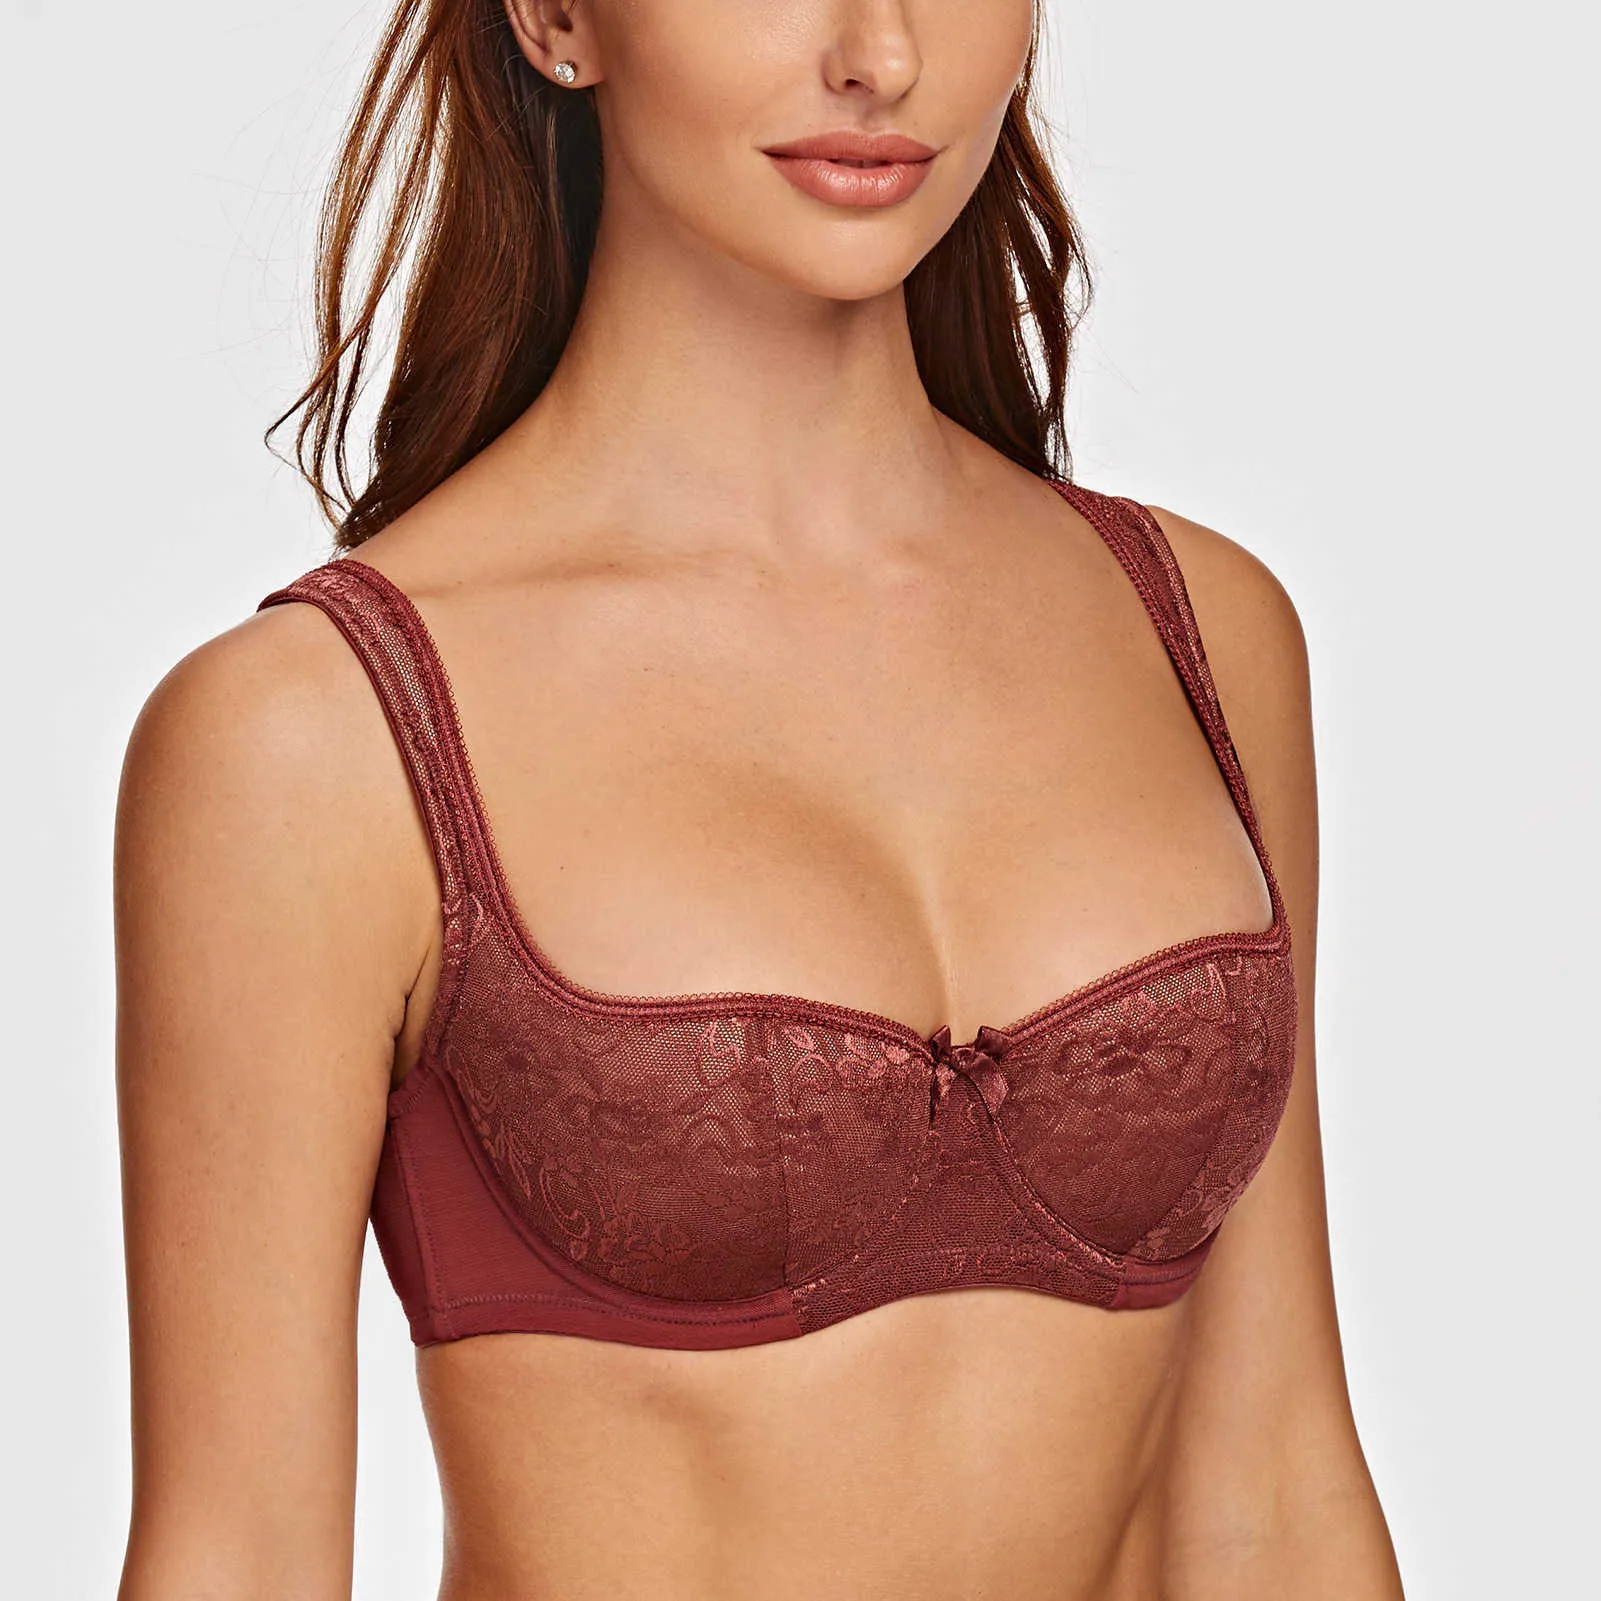 MELENECA Womens Lace Balconette Lace Push Up Bra With Padded Strap And Half Cup  Underwire Sexy And Comfortable 210728 From Lu02, $18.67